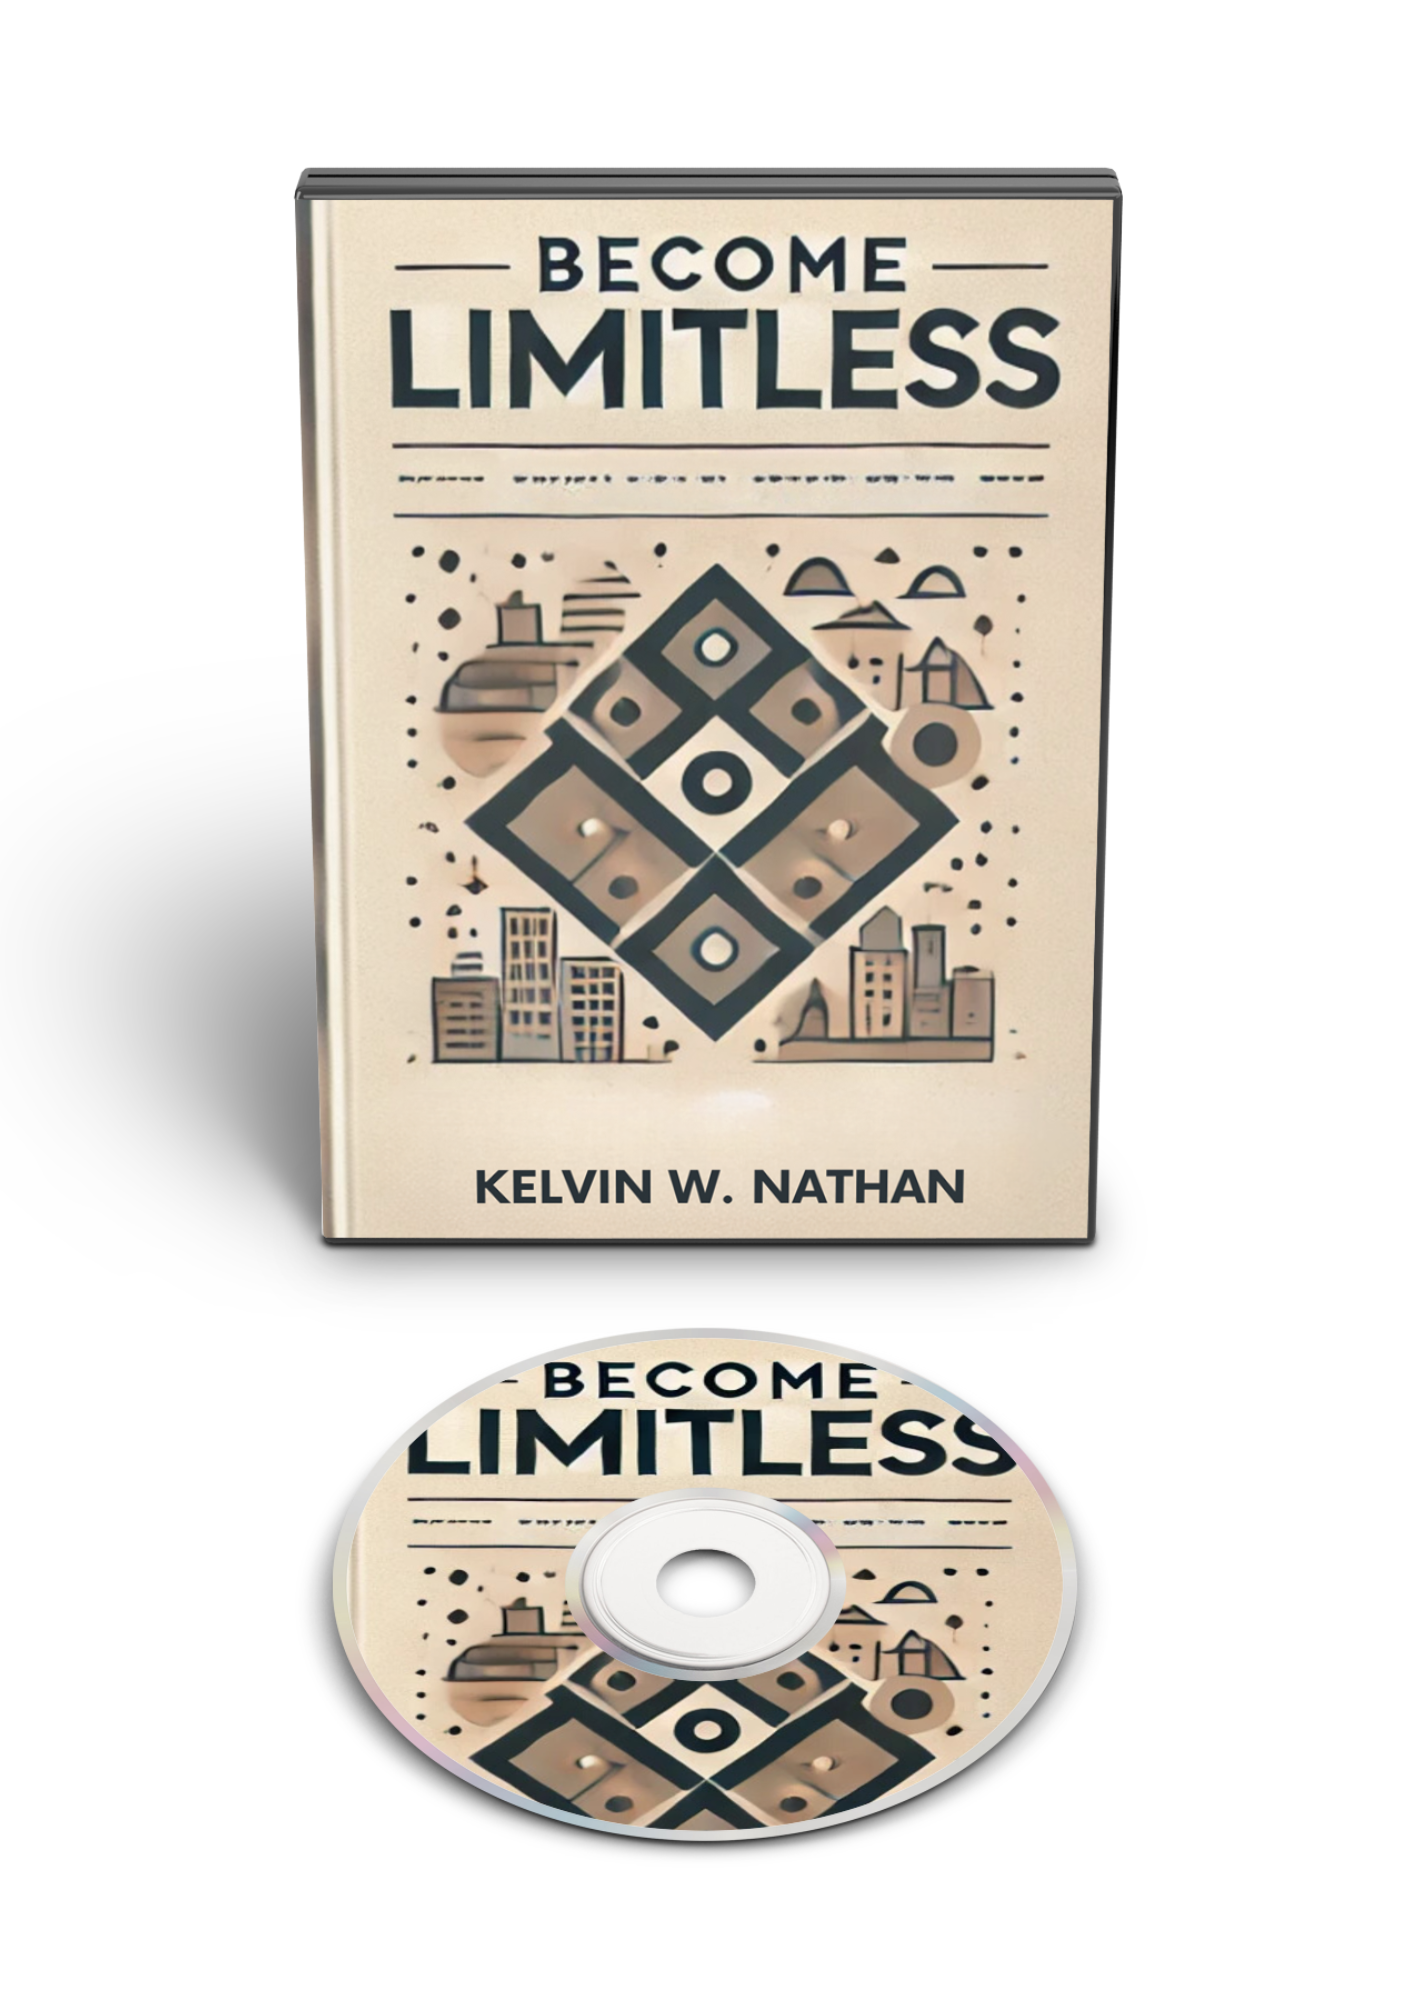 Become Limitless: How to Train Your Brain for Abundant Success (Audiobook)